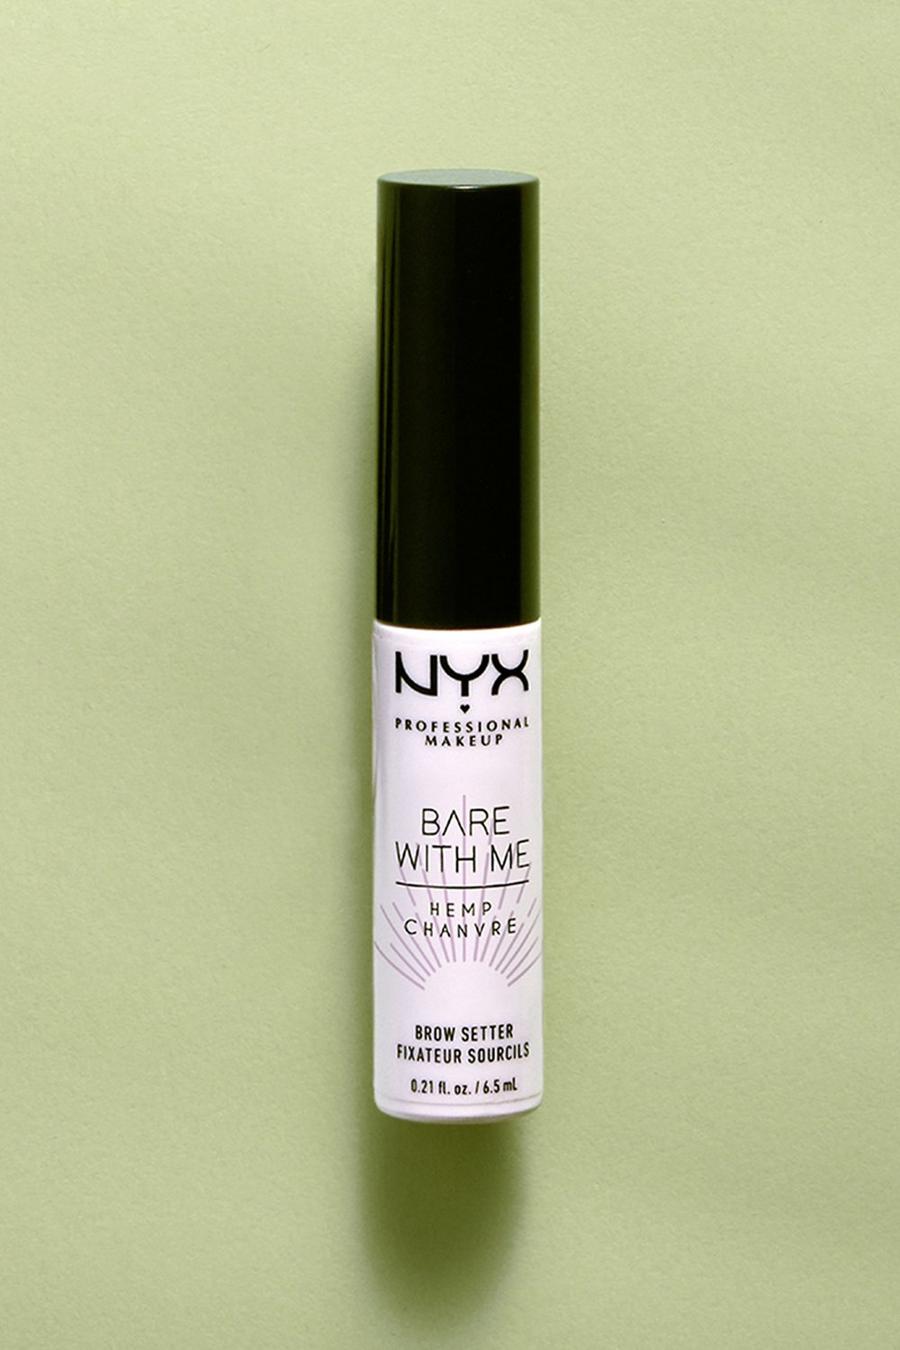 NYX Professional Makeup Bare With Me Hemp Brow Setter, 01 clear